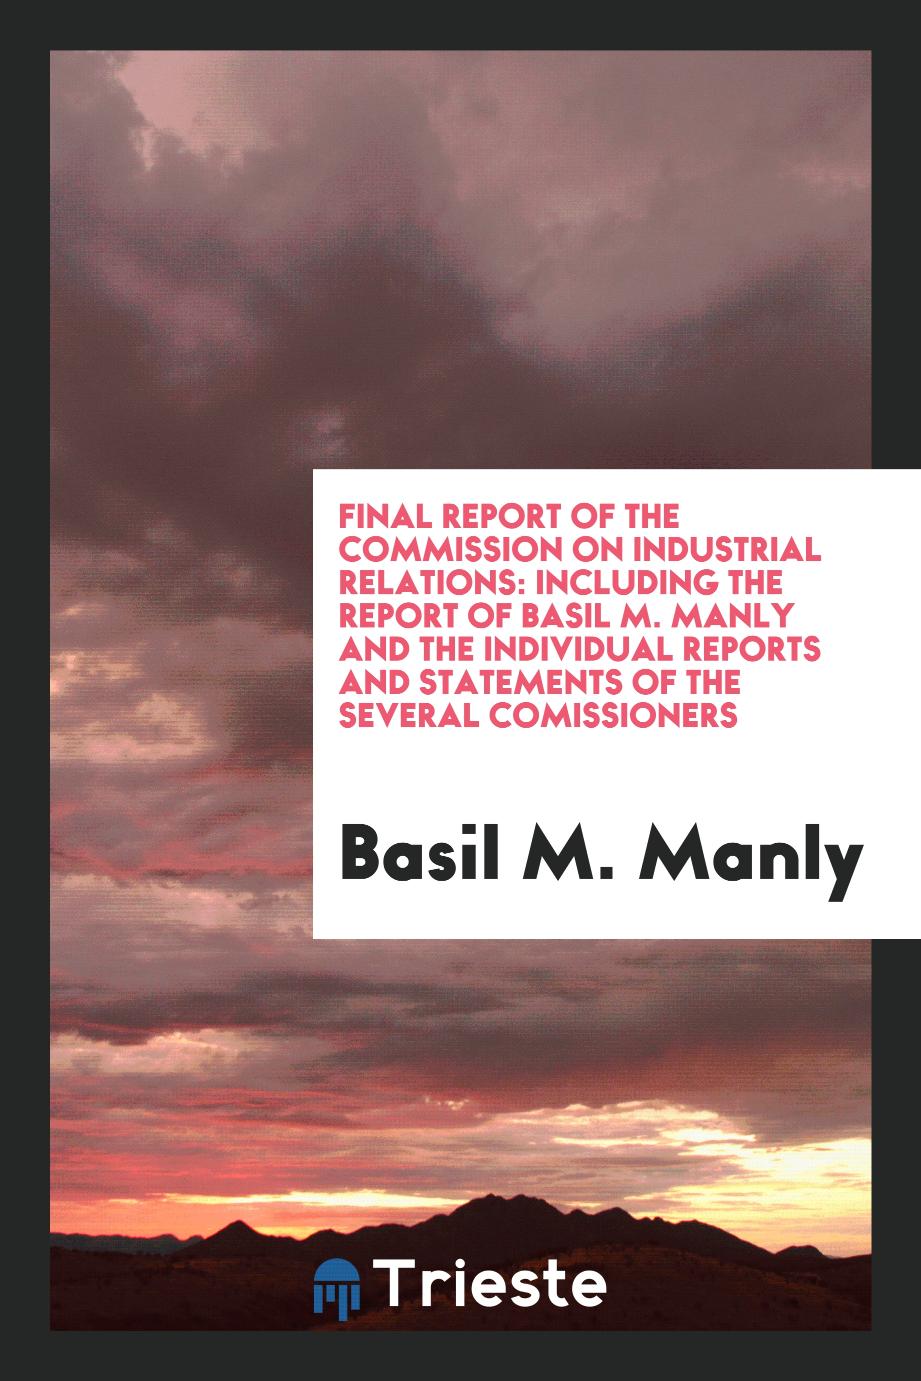 Final Report of the Commission on Industrial Relations: Including the Report of Basil M. Manly and the Individual Reports and Statements of the Several Comissioners